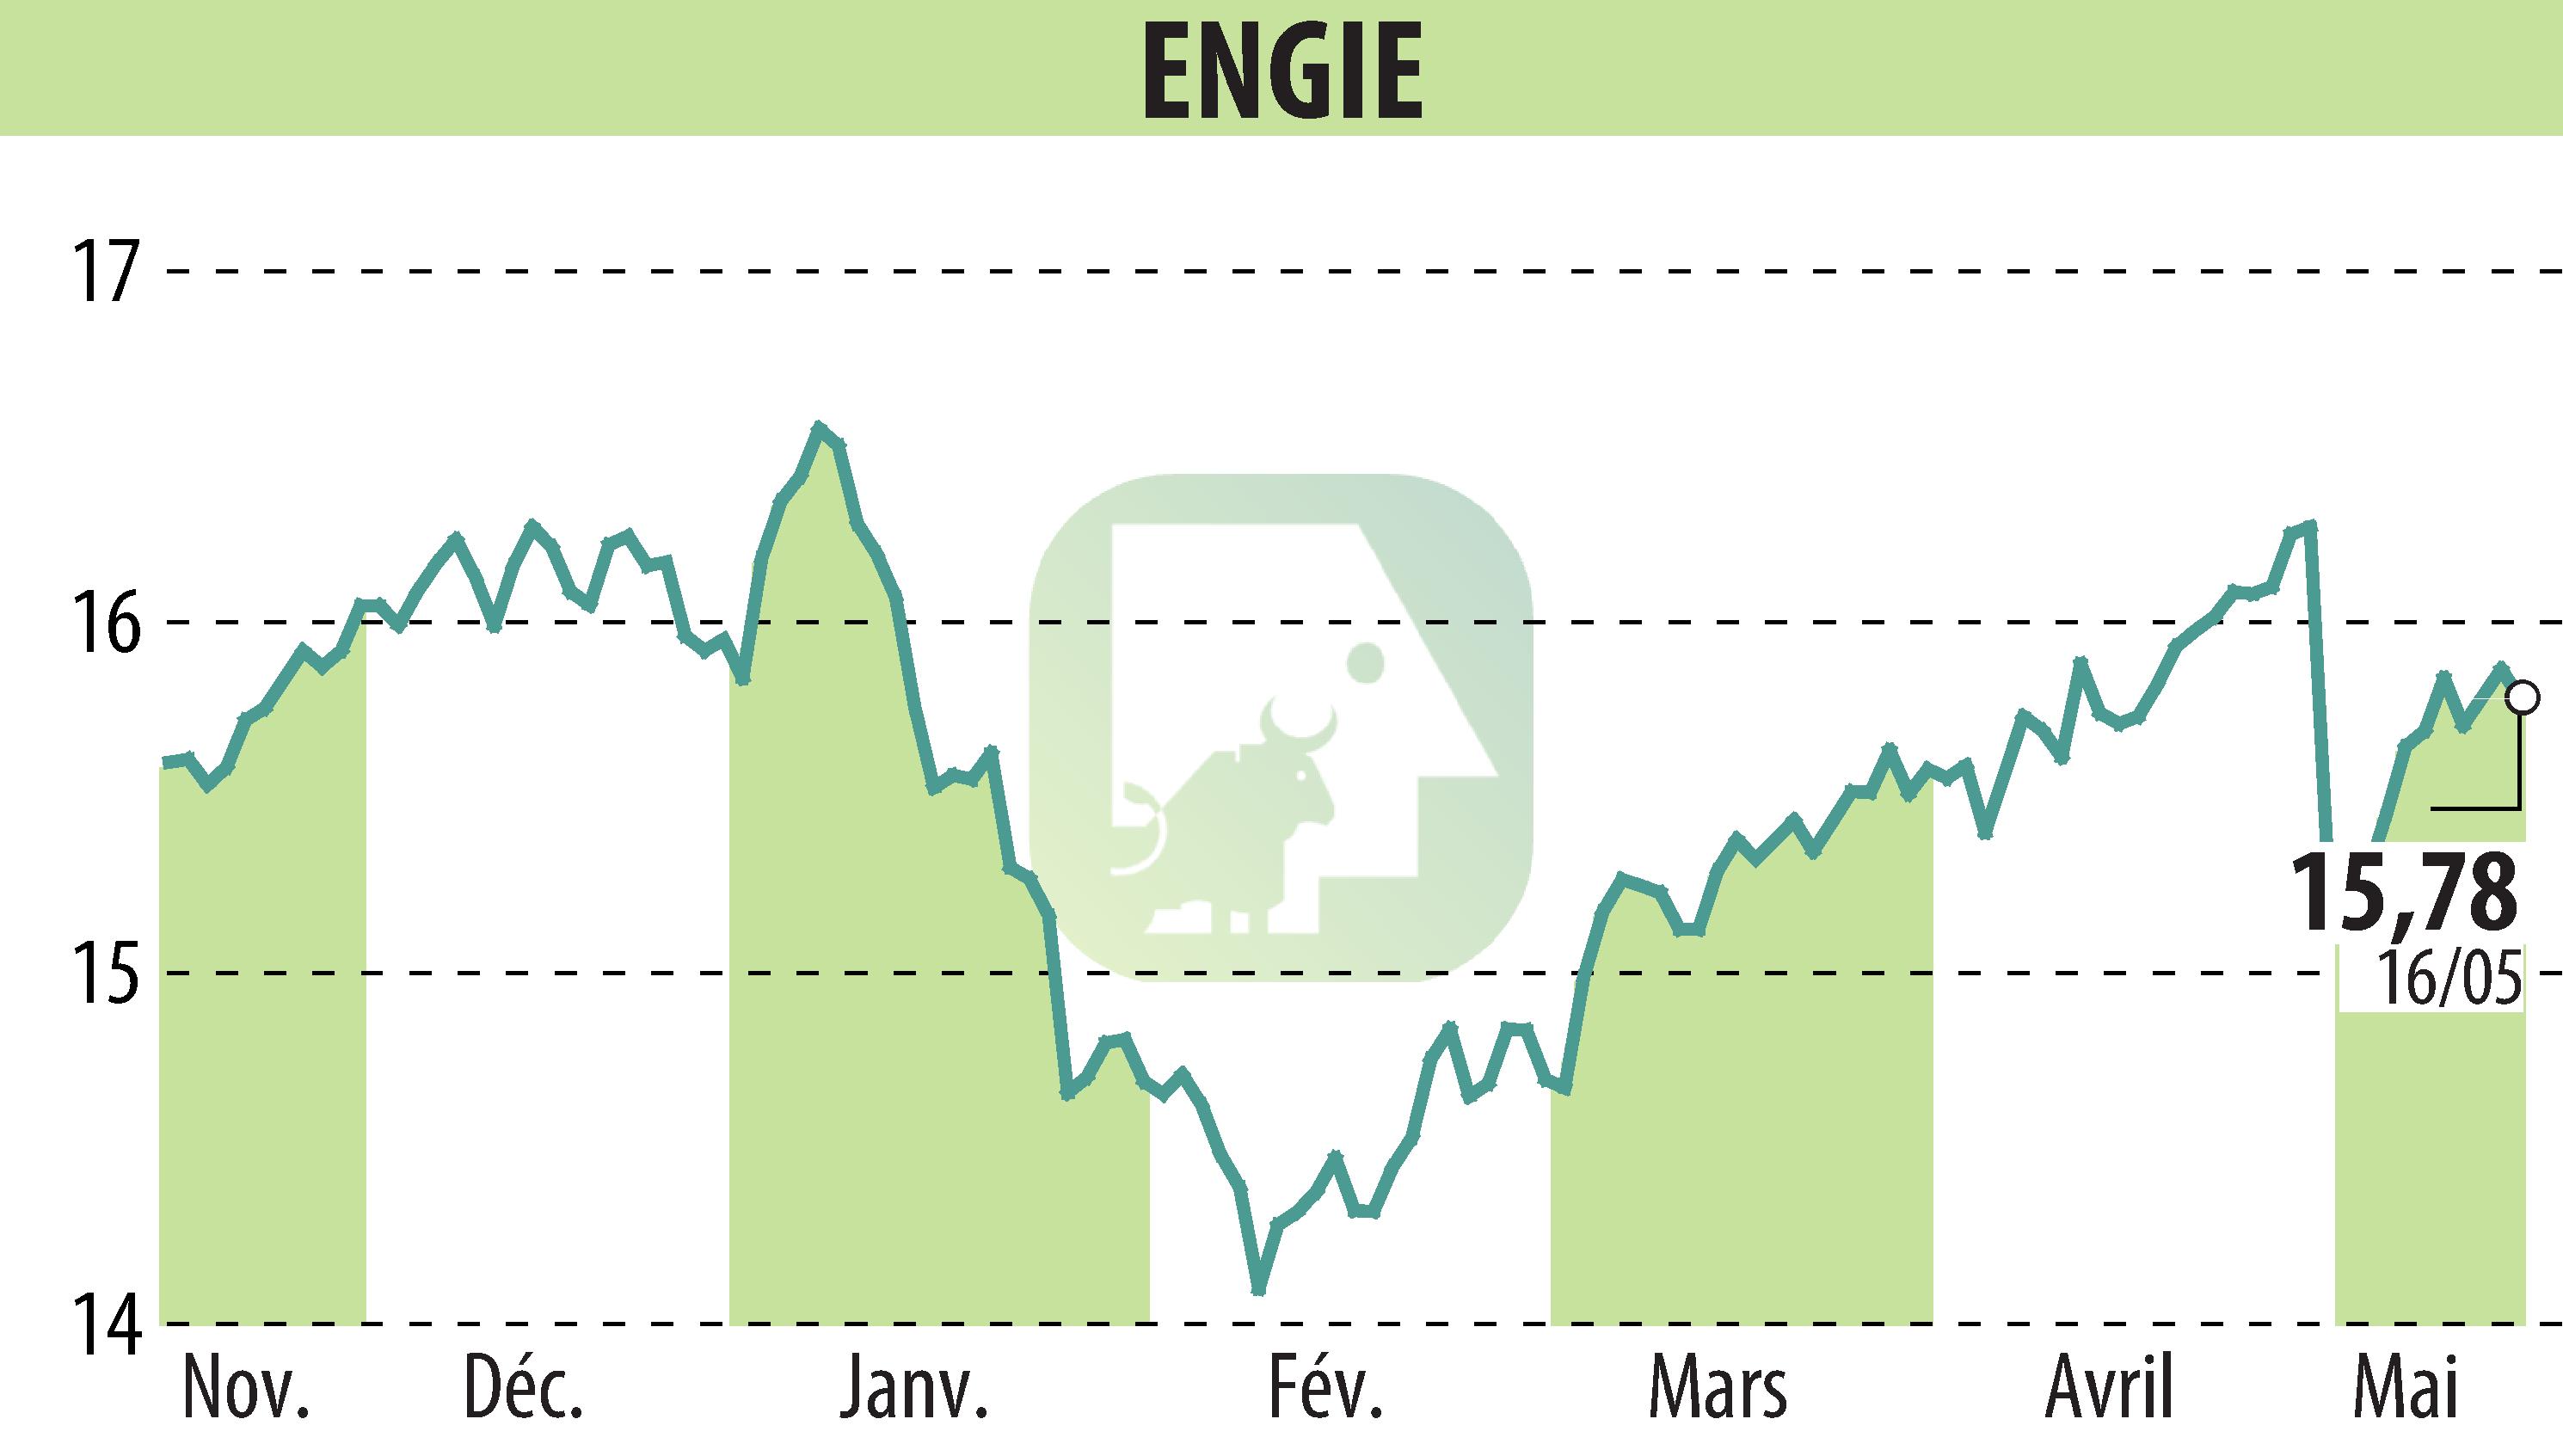 Stock price chart of ENGIE (EPA:ENGI) showing fluctuations.